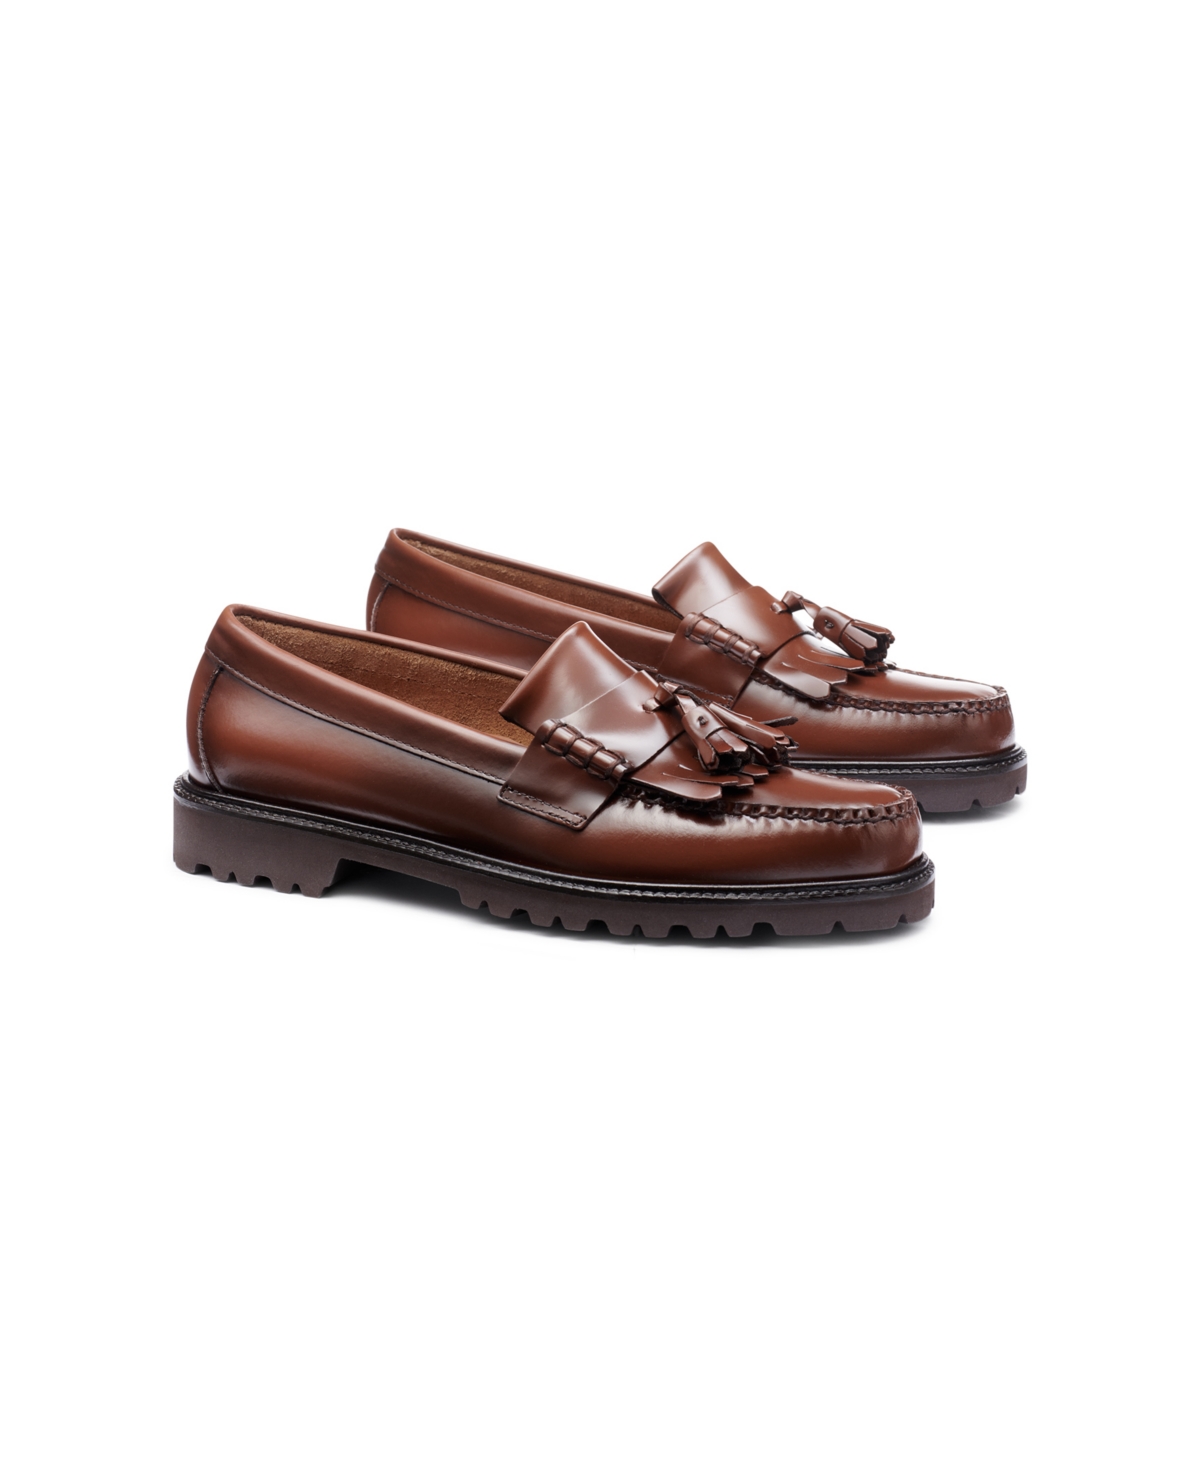 Gh Bass G.h.bass Men's Layton Kiltie Lug Weejuns Loafers In Whiskey